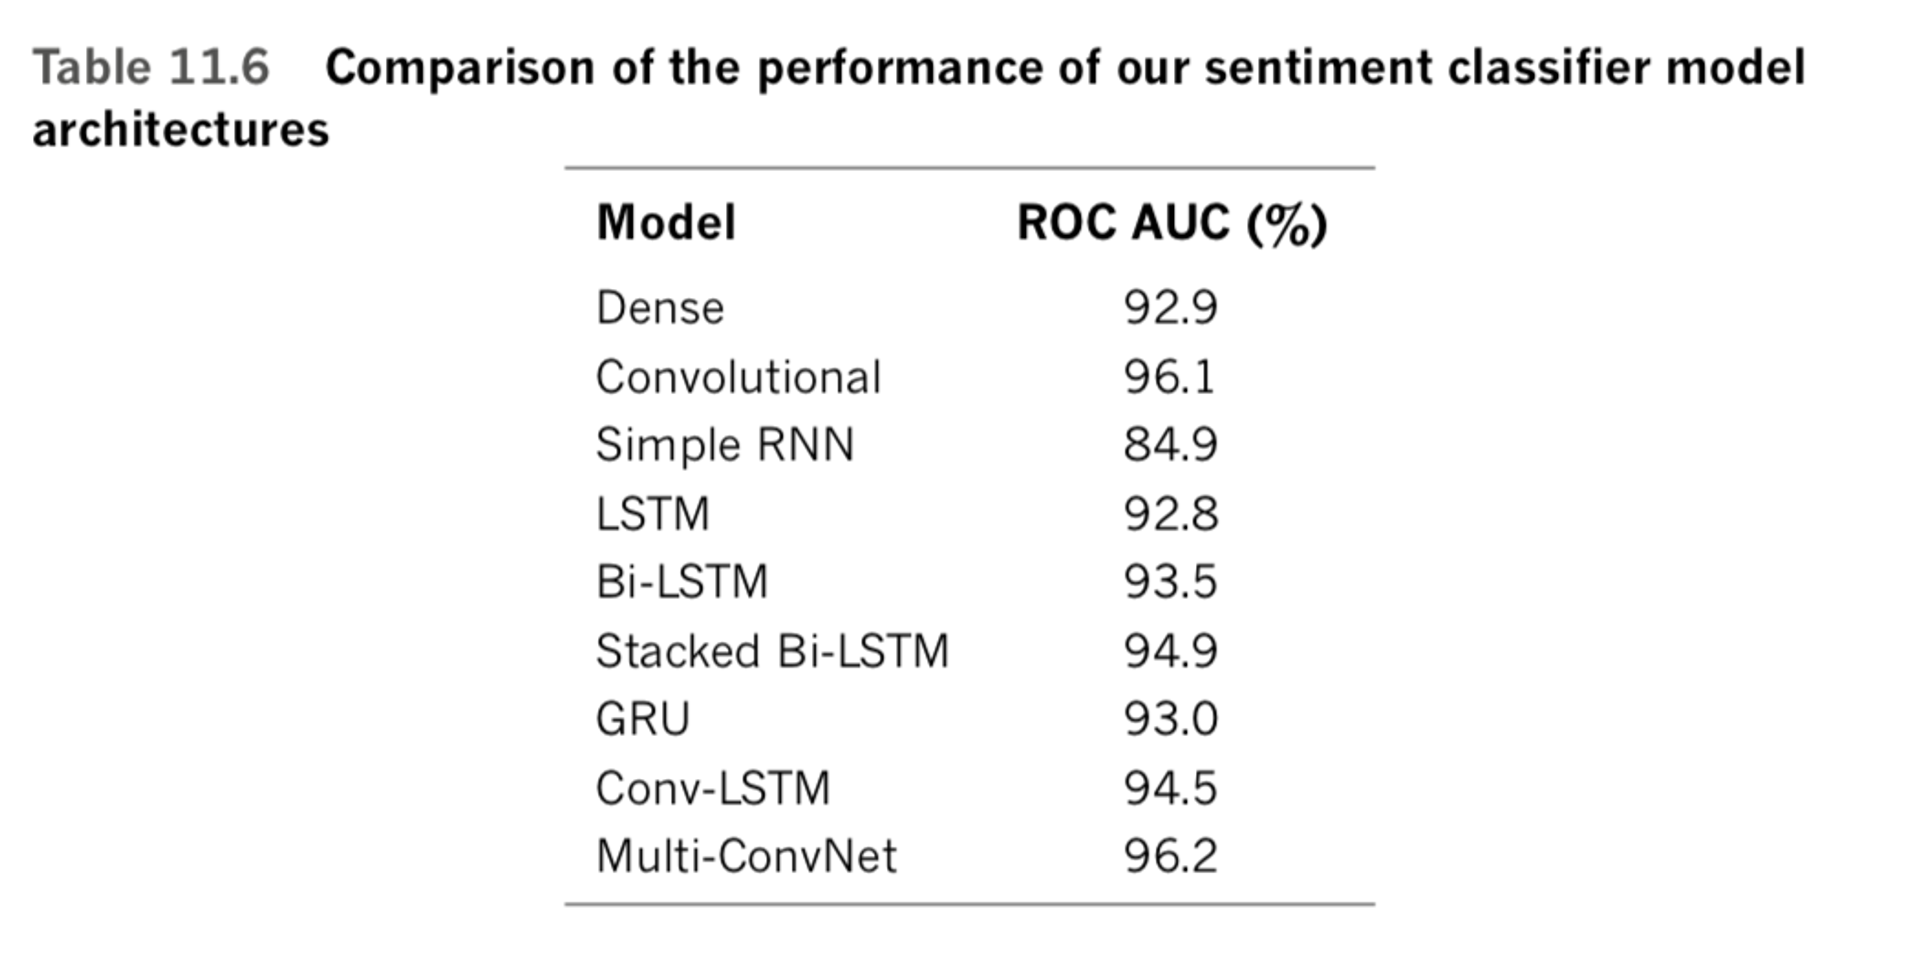 Comparison of the performance of our sentiment classifier model architectures